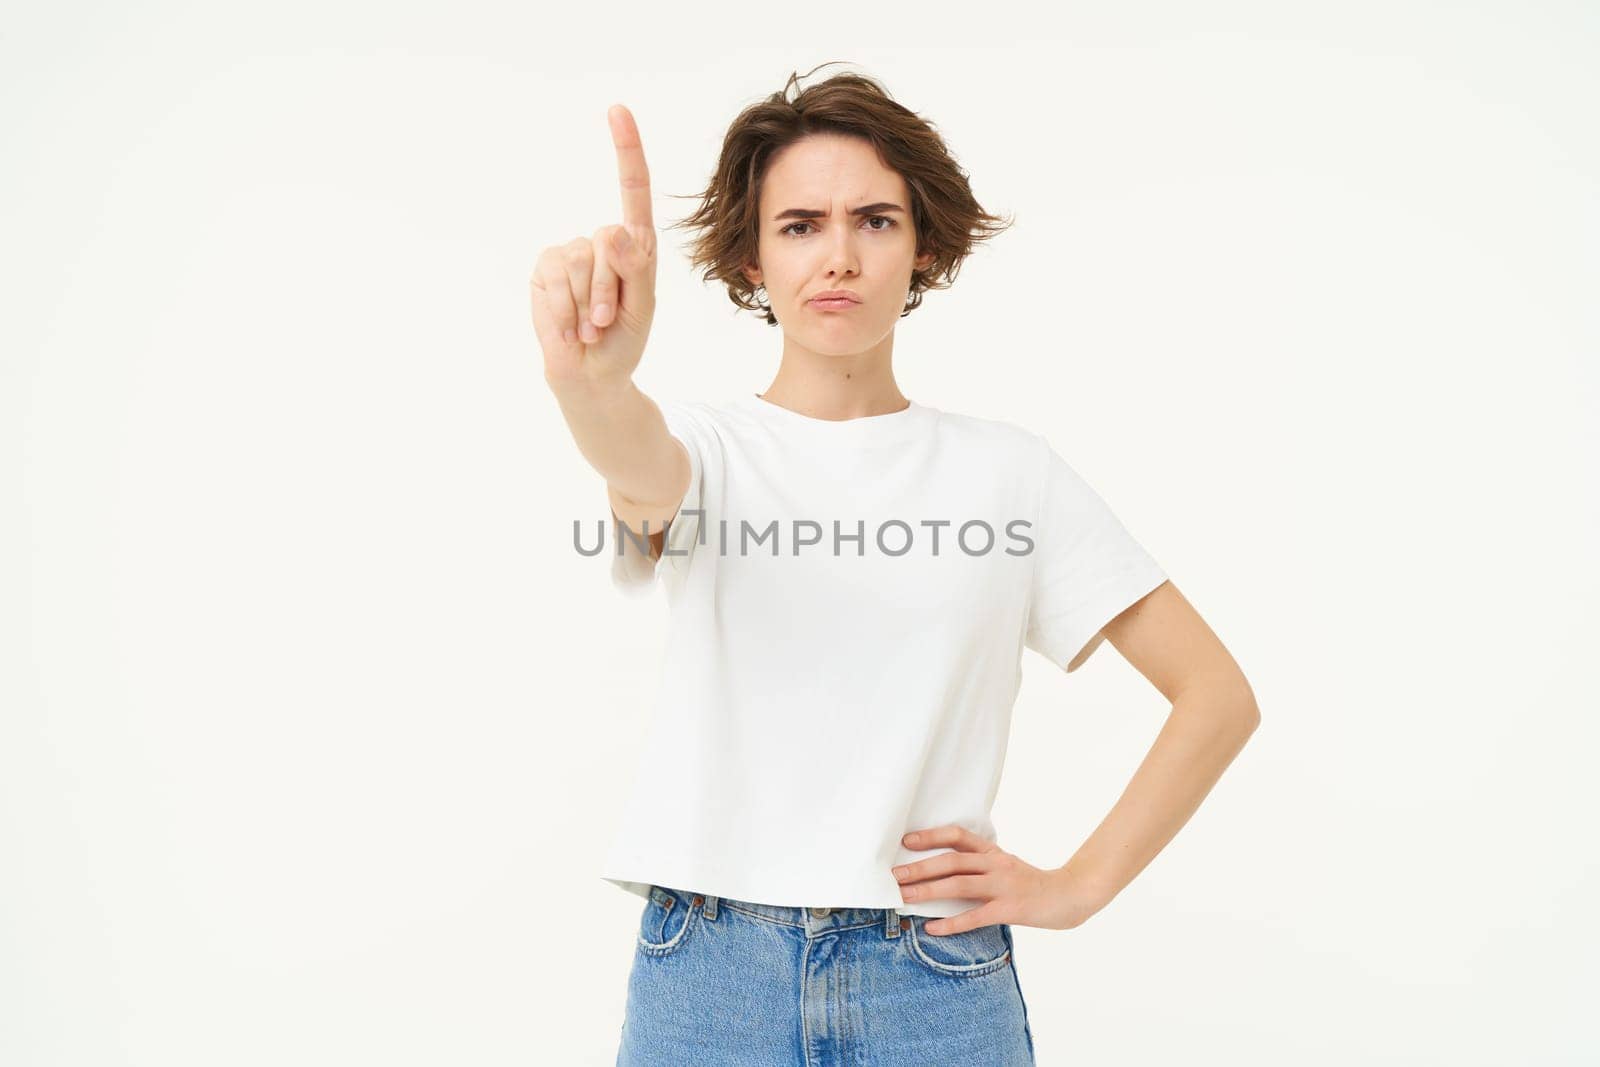 Portrait of serious young woman, shows one finger, stop gesture, disapprove something with frowning face, stands over white background.